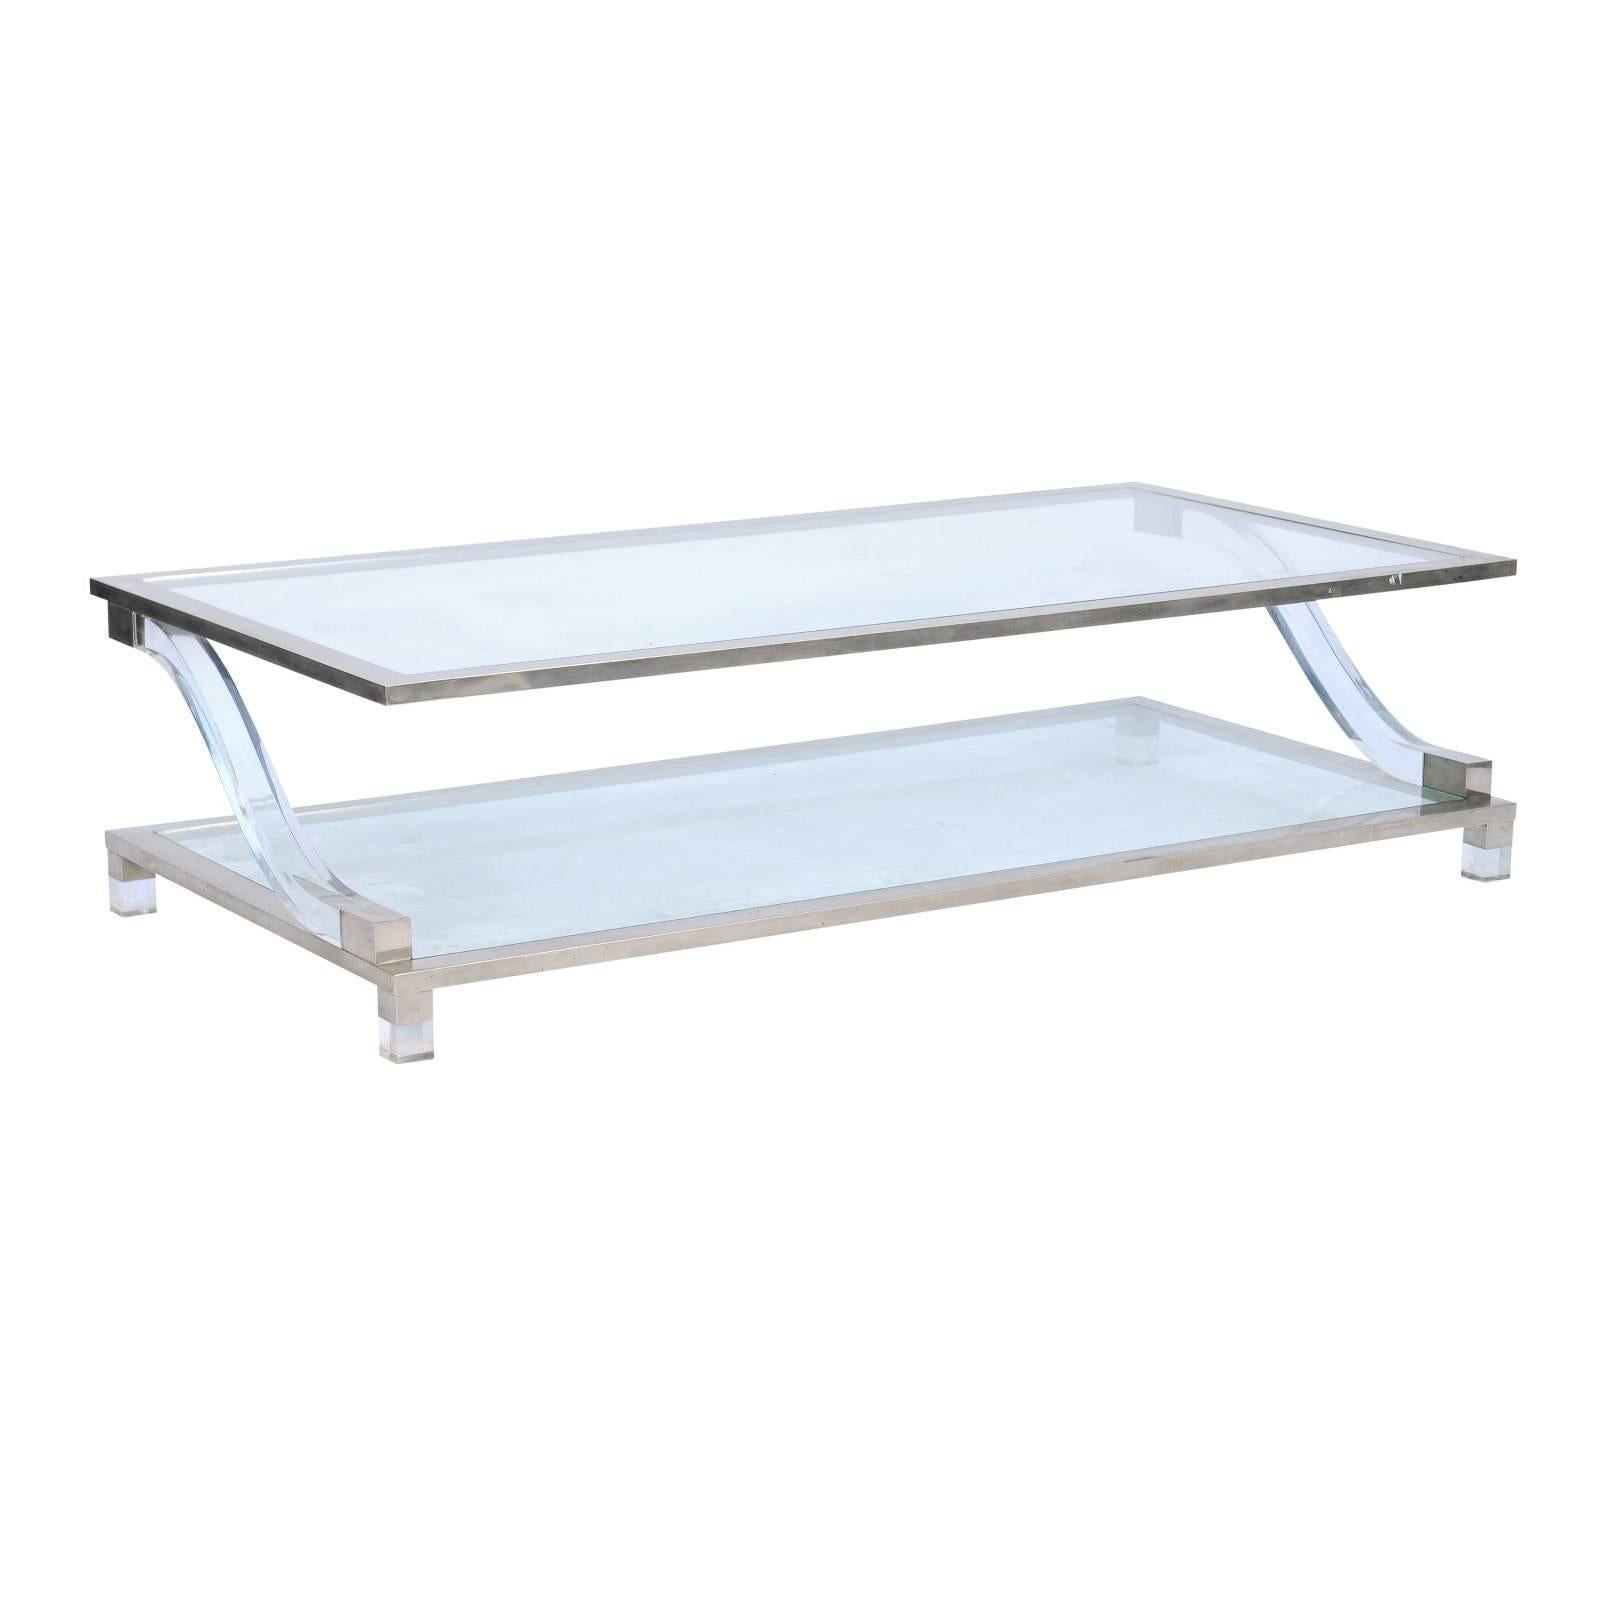 Italian Stainless Steel and Lucite Midcentury Coffee Table with Glass Shelves